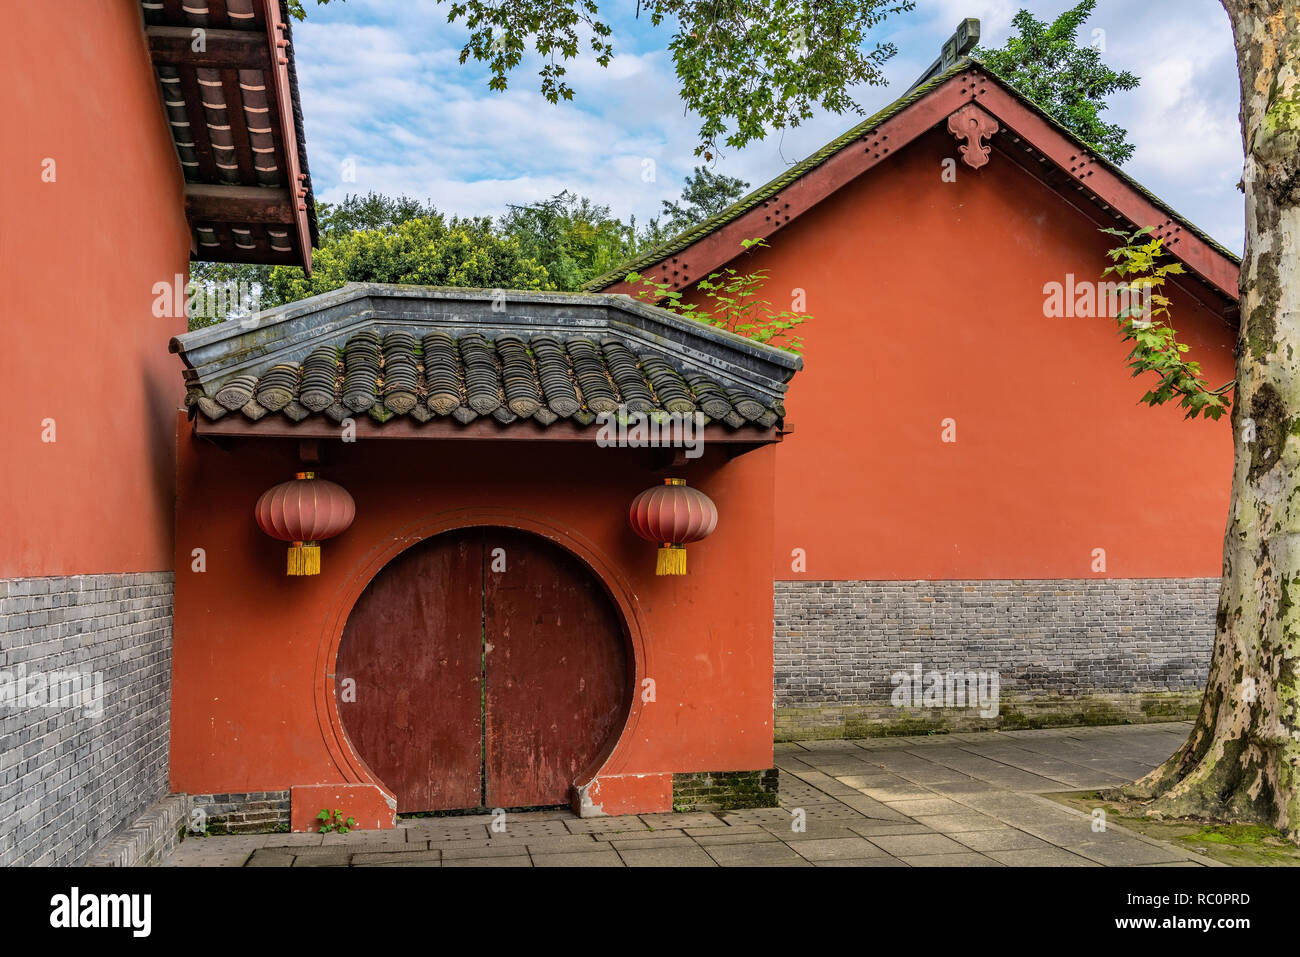 Traditional Chinese architecture at Jinli ancient street, Chengdu Stock Photo